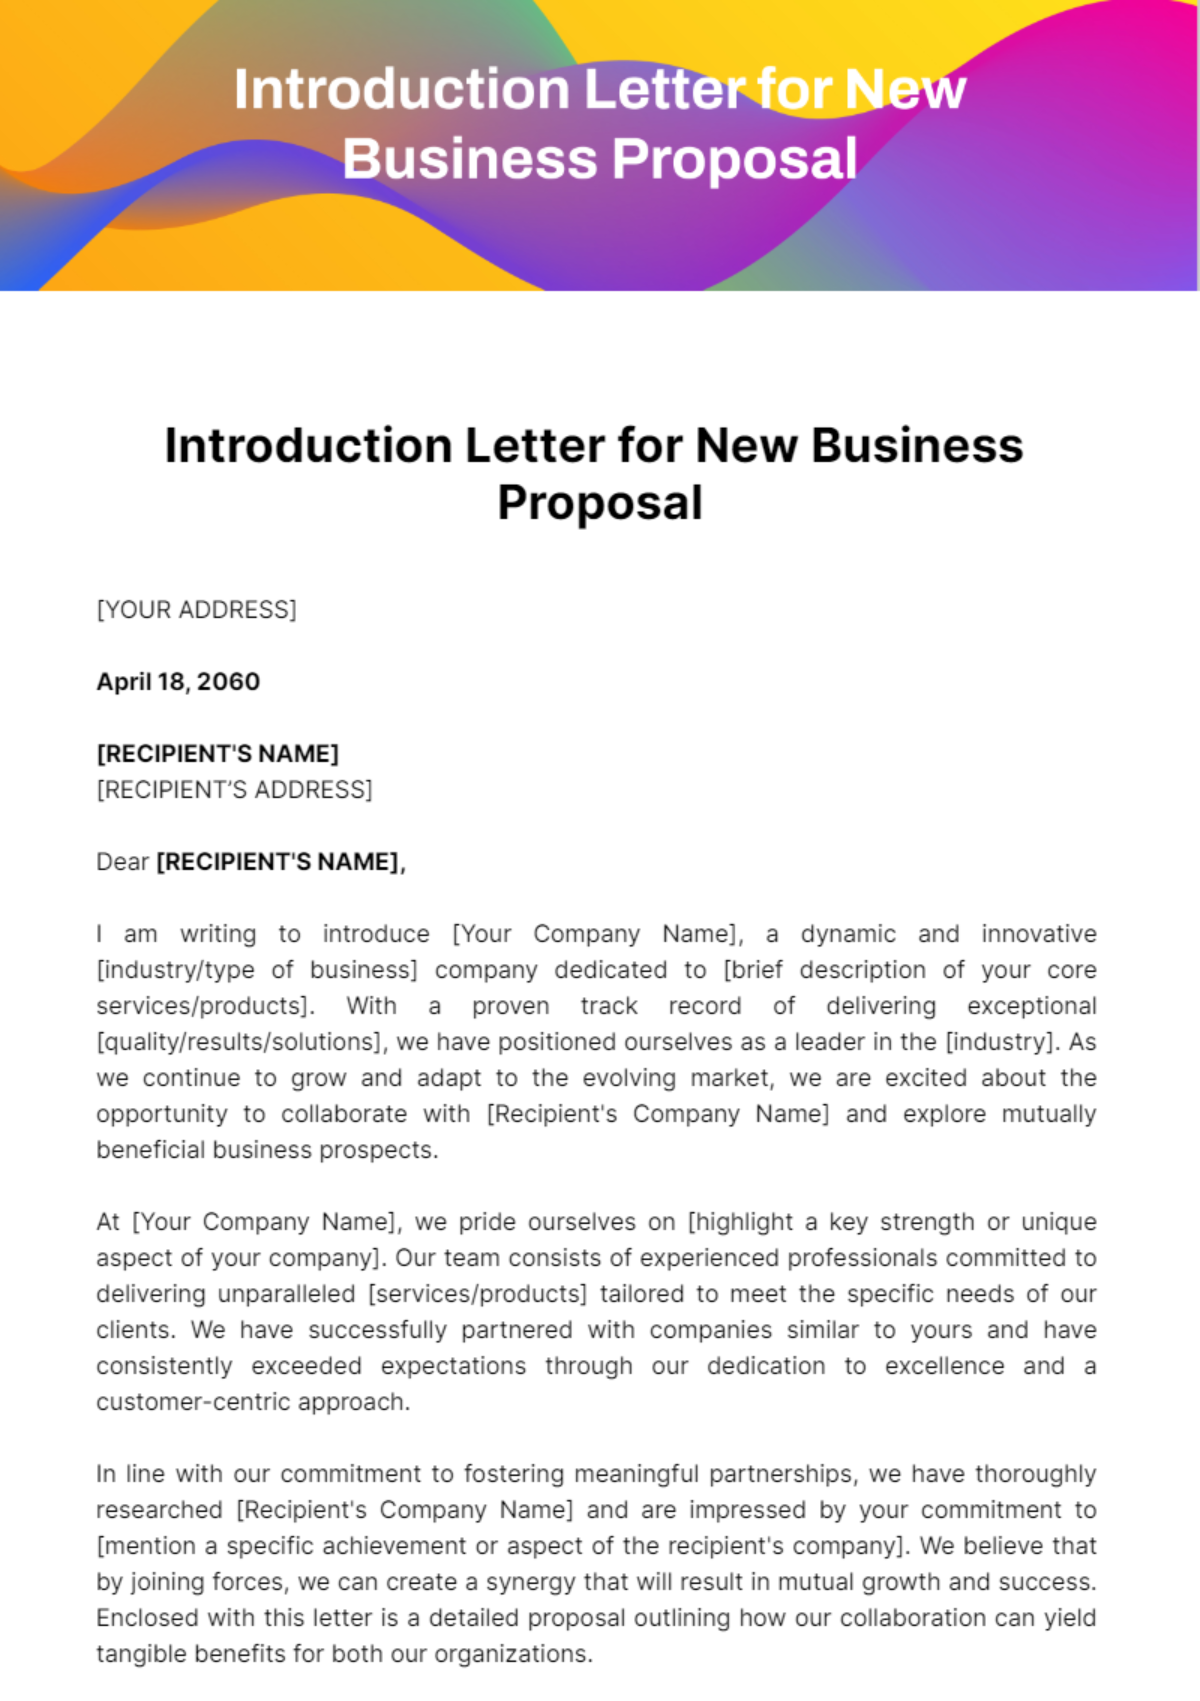 Free Introduction Letter for New Business Proposal Template